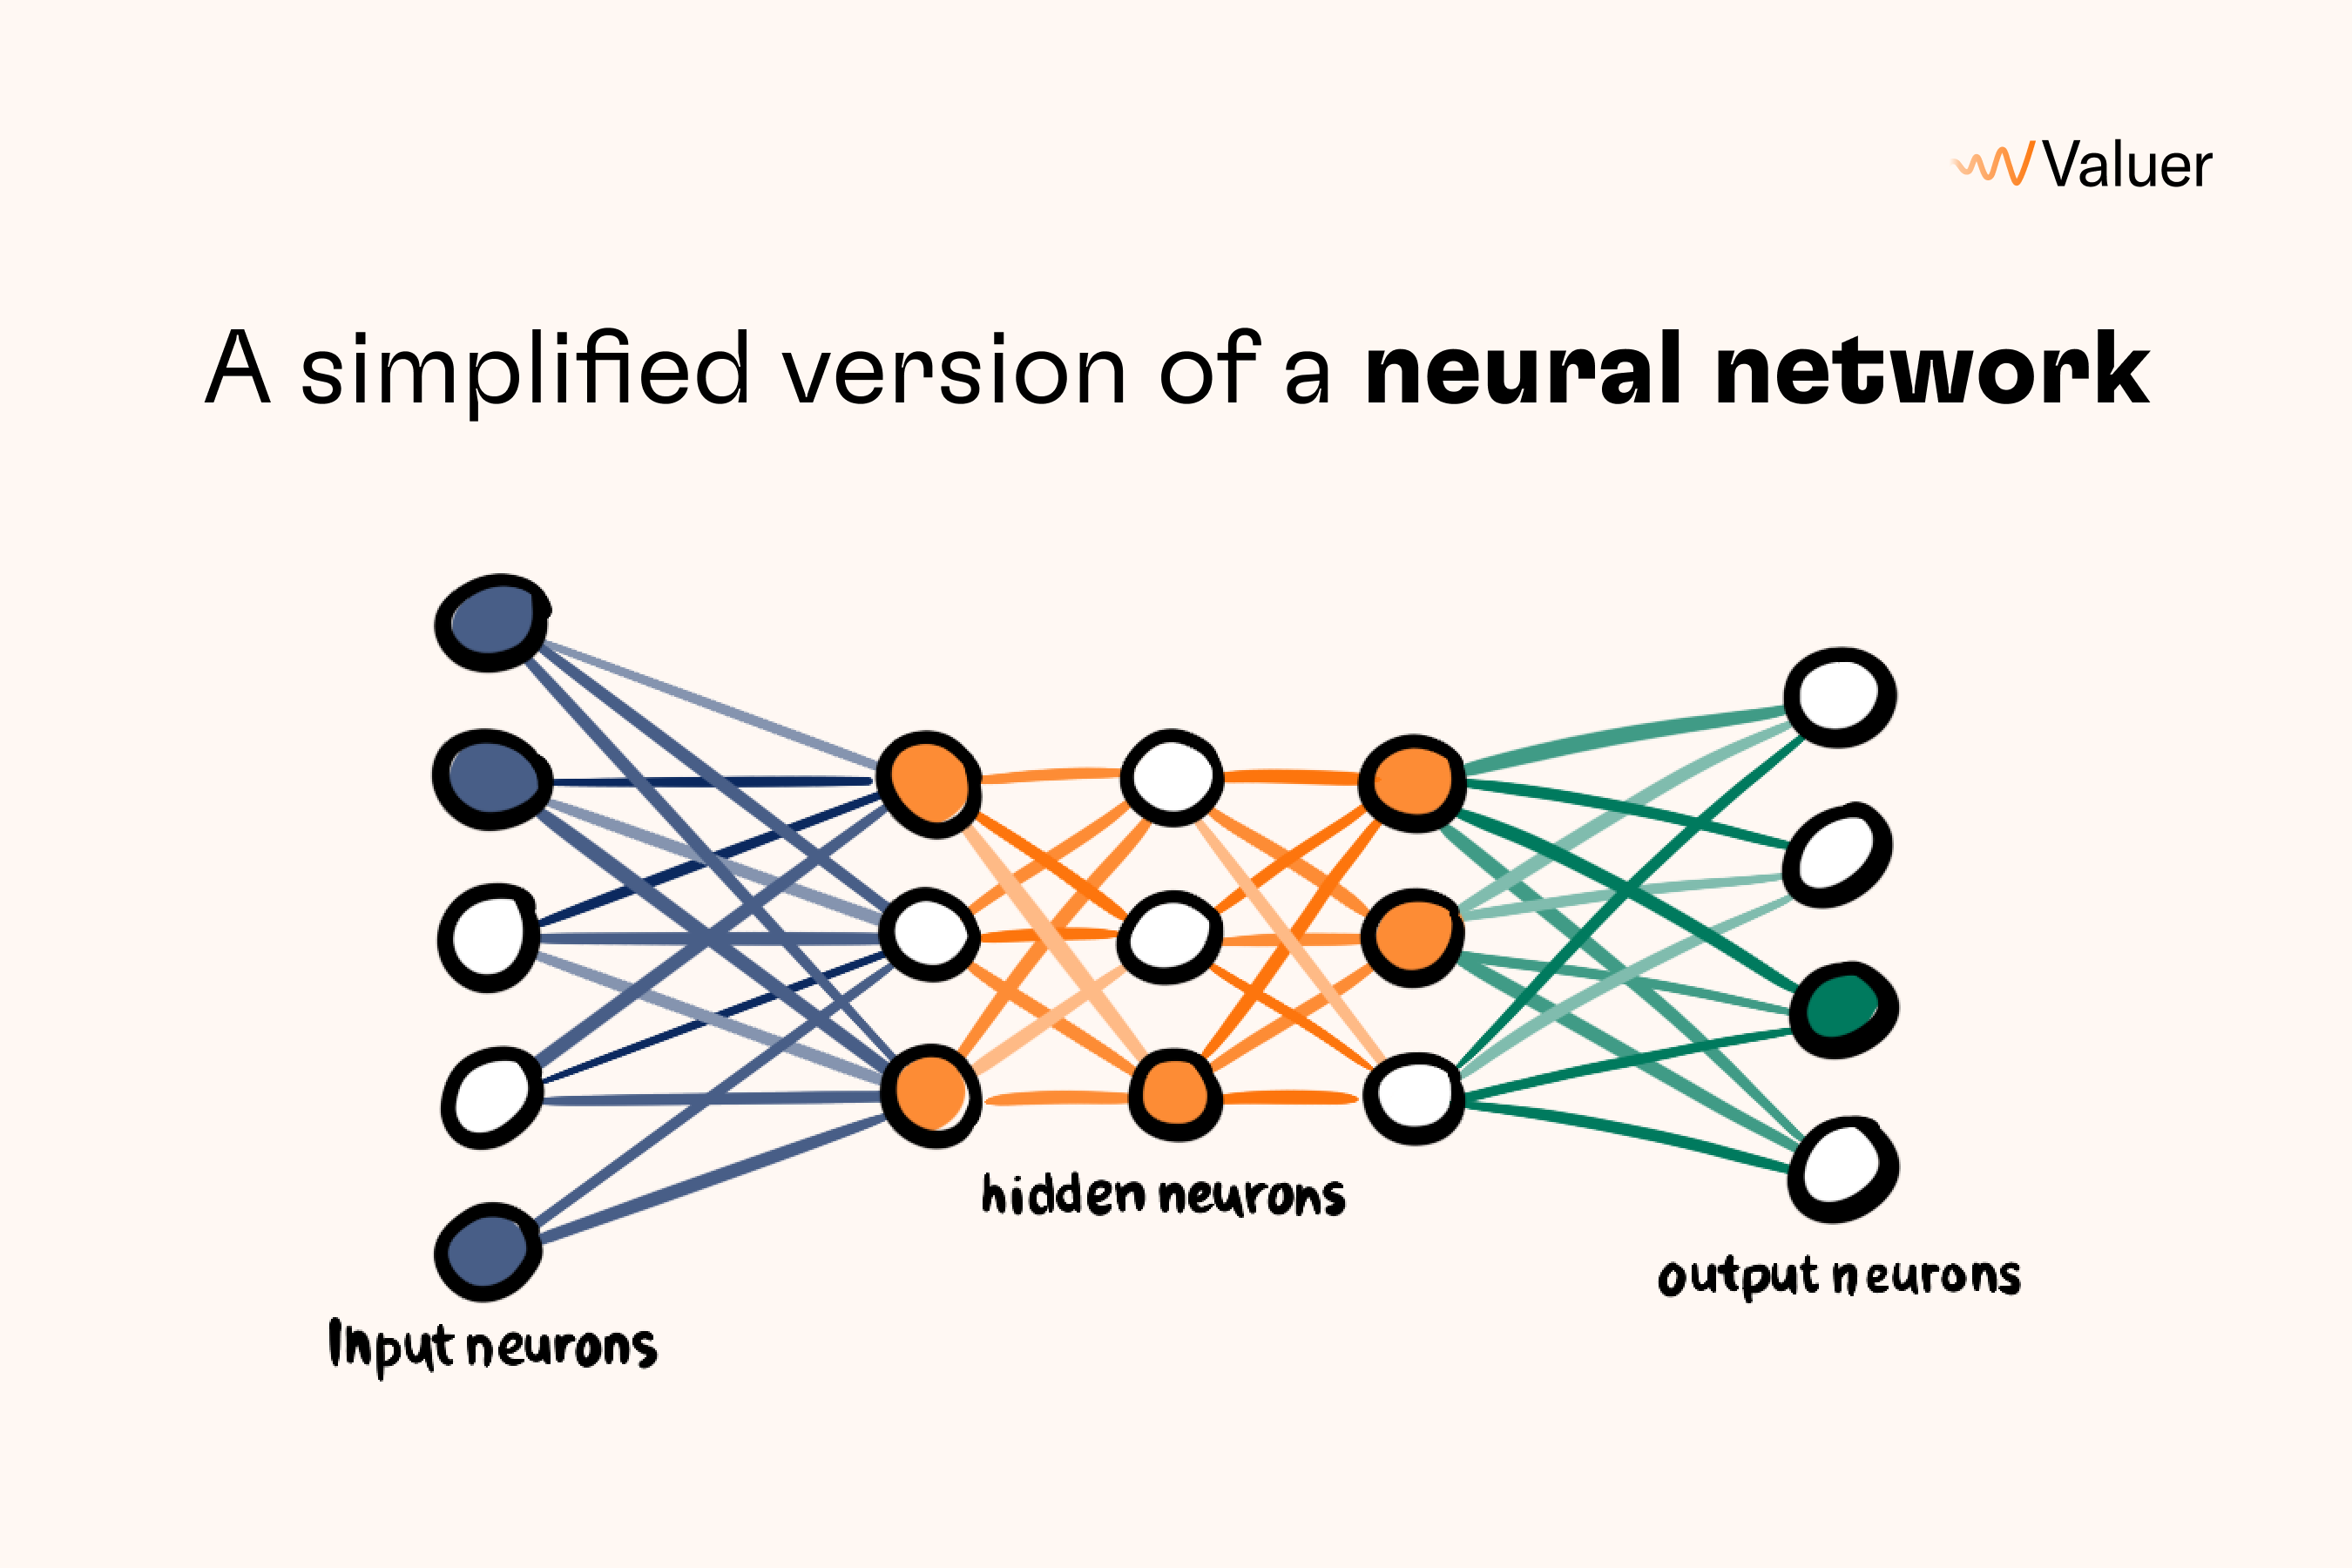 A simplified version of a neural network